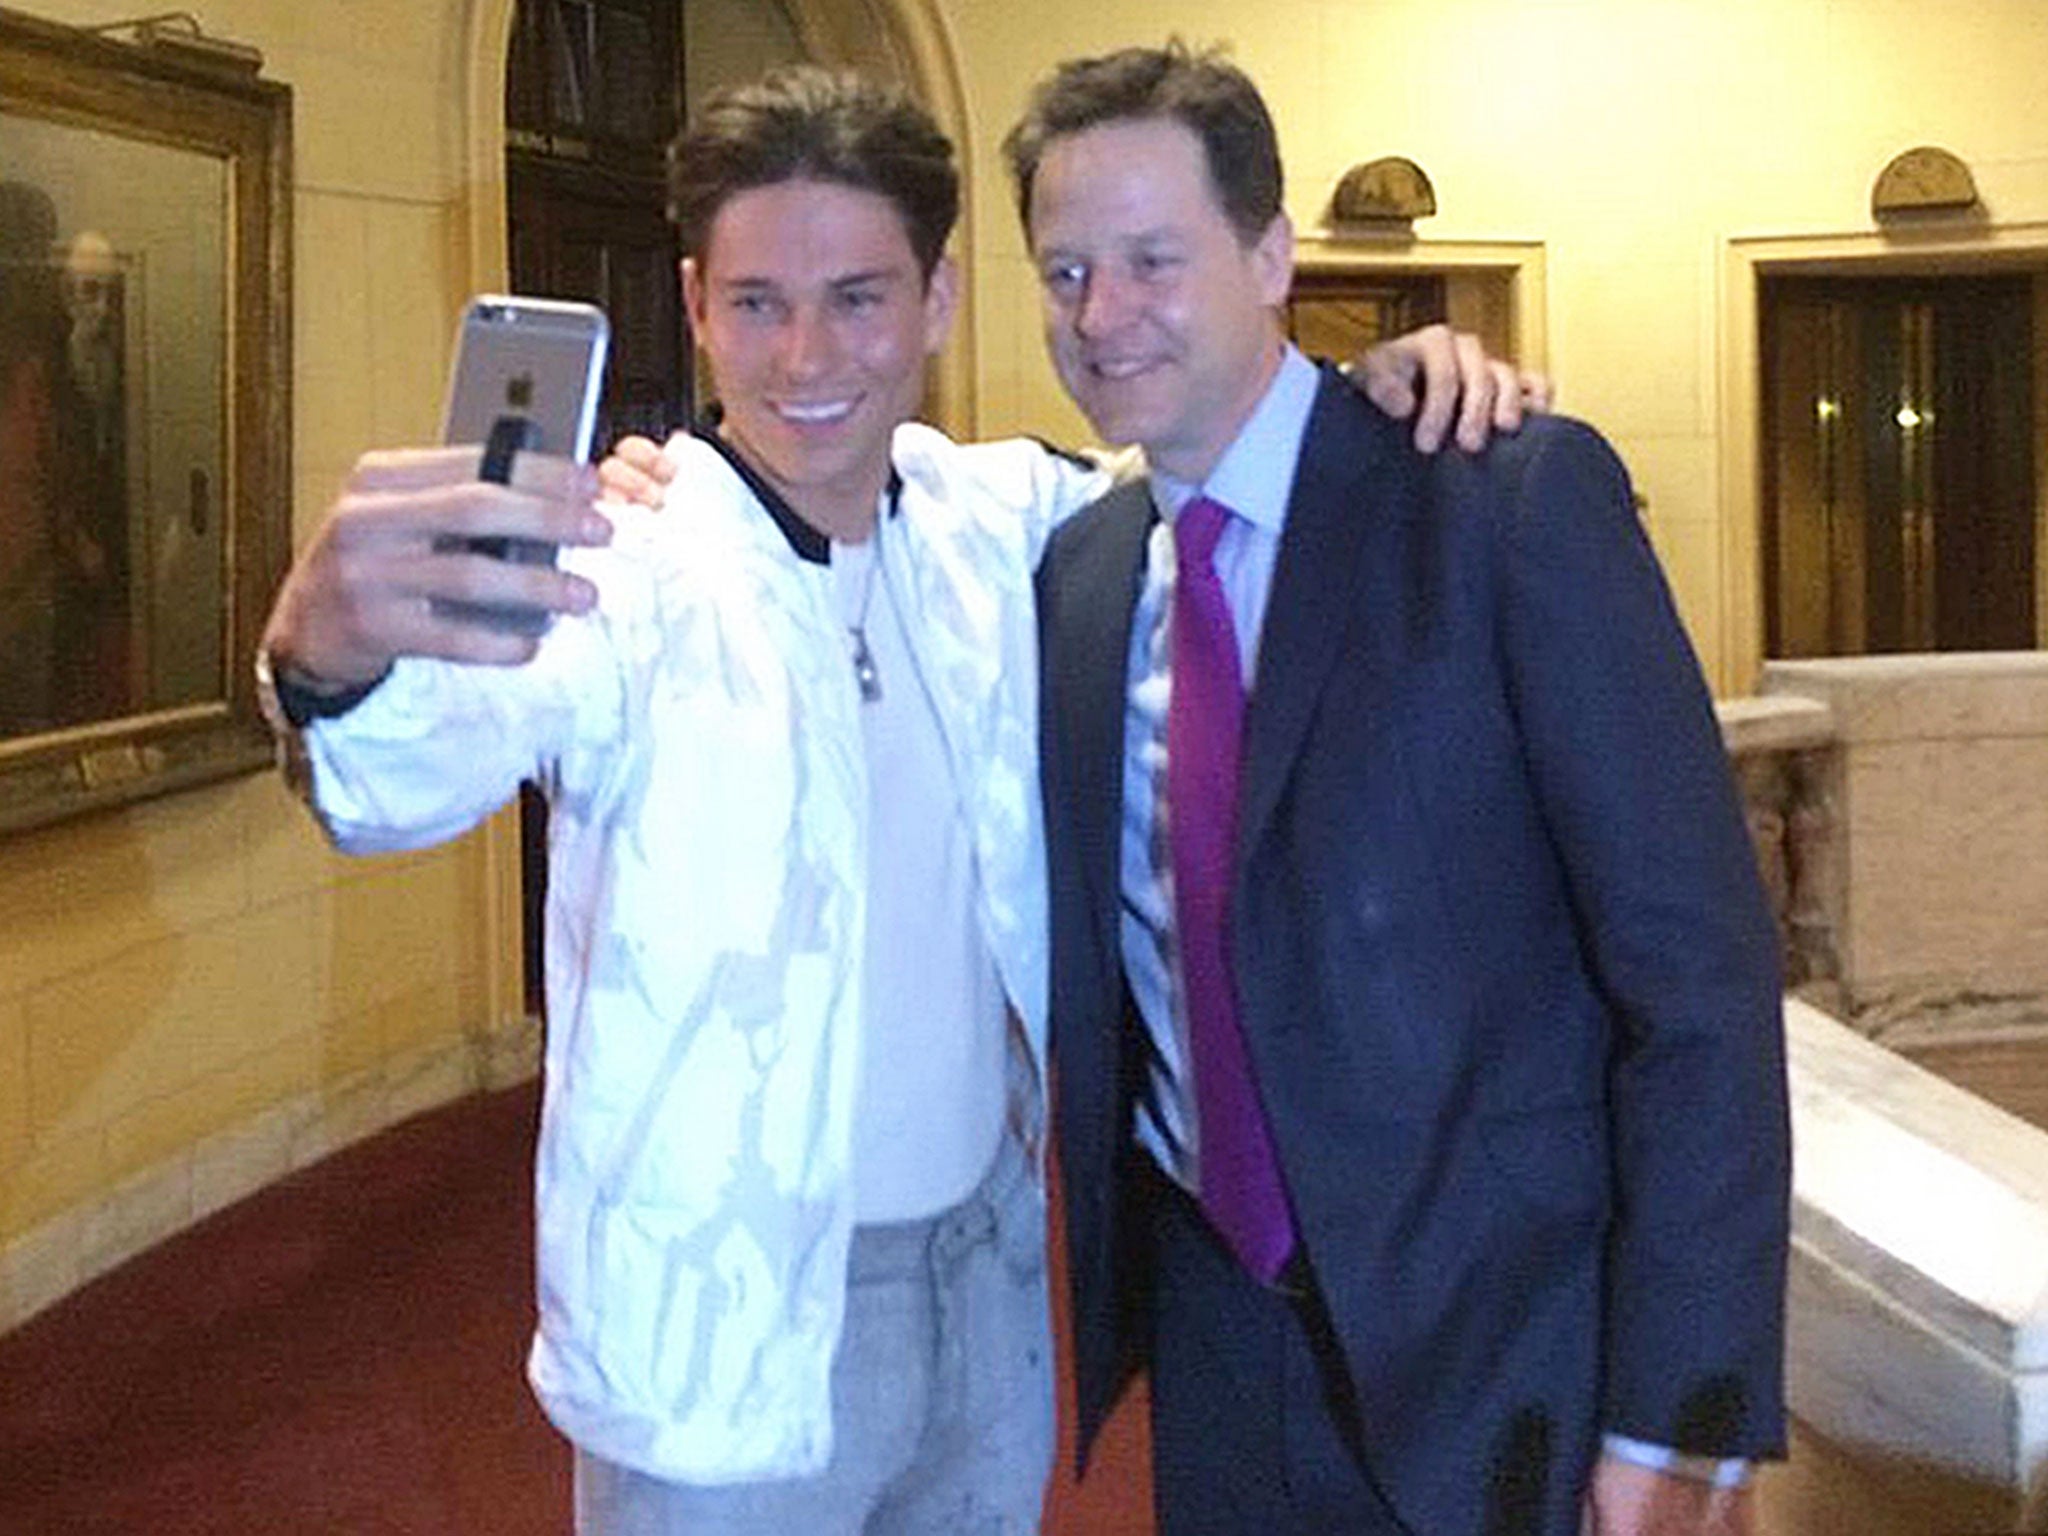 Liberal Democrat leader Nick Clegg poses for a selfie with Joey Essex